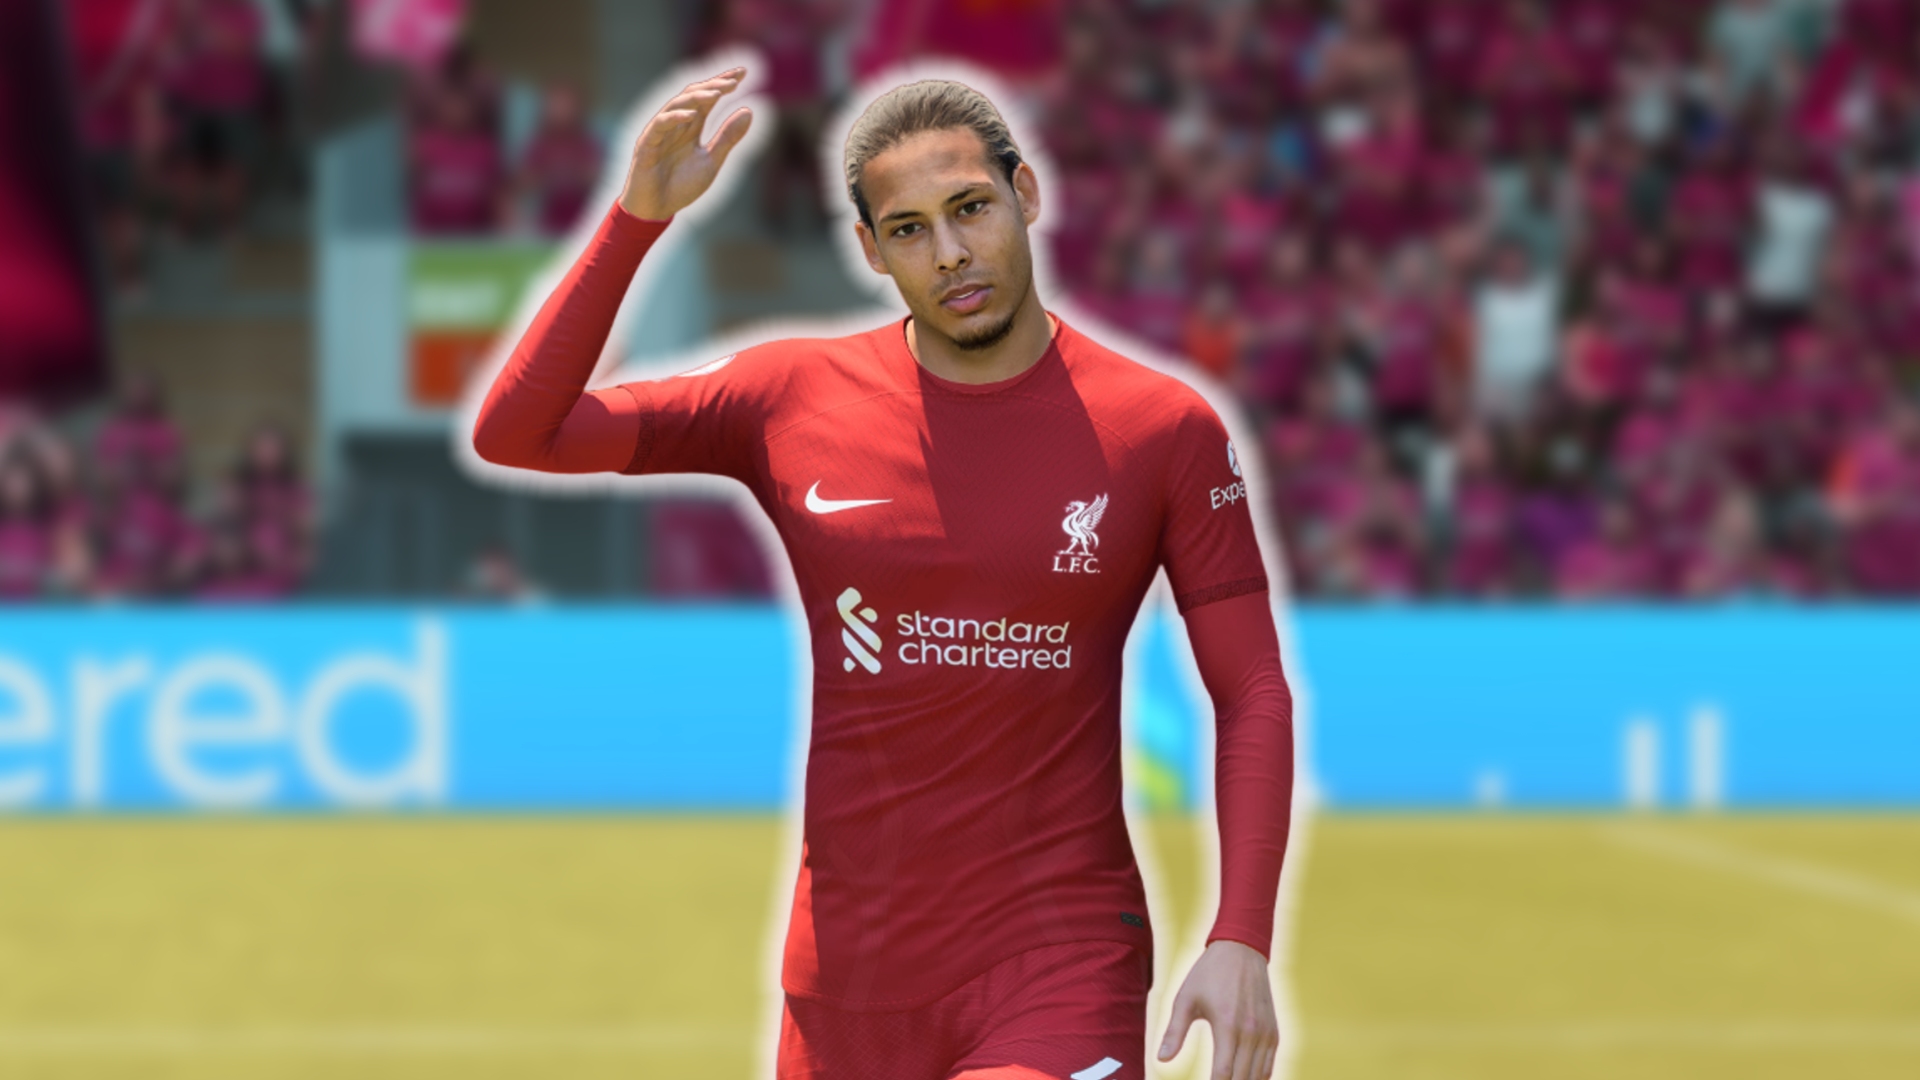 EA FC 24 player ratings leaked – Liverpool, Tottenham and PSG ratings shown  - Mirror Online